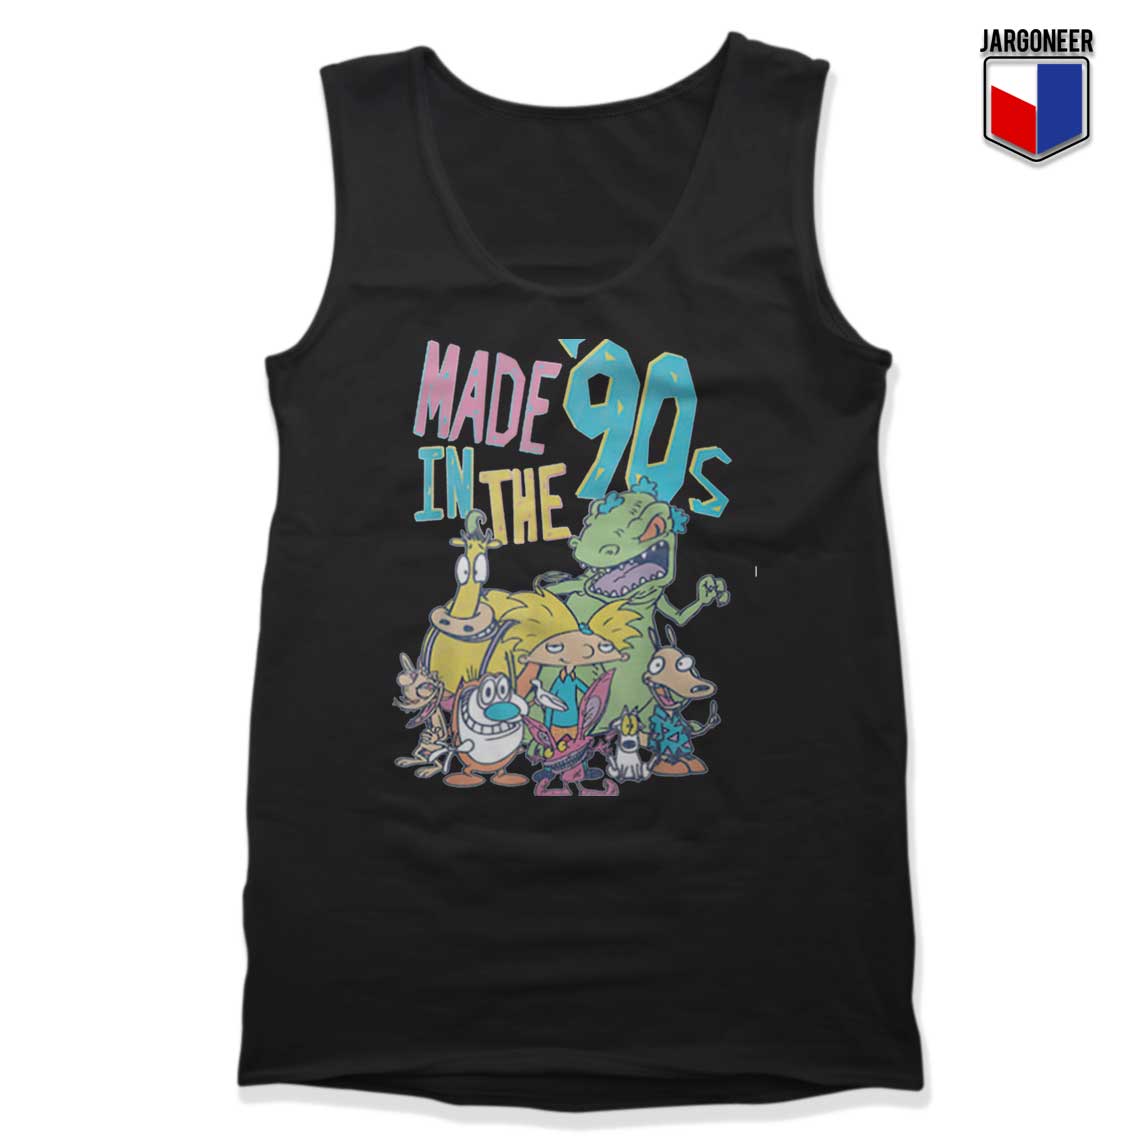 Made In The 90s Tank Top - Shop Unique Graphic Cool Shirt Designs